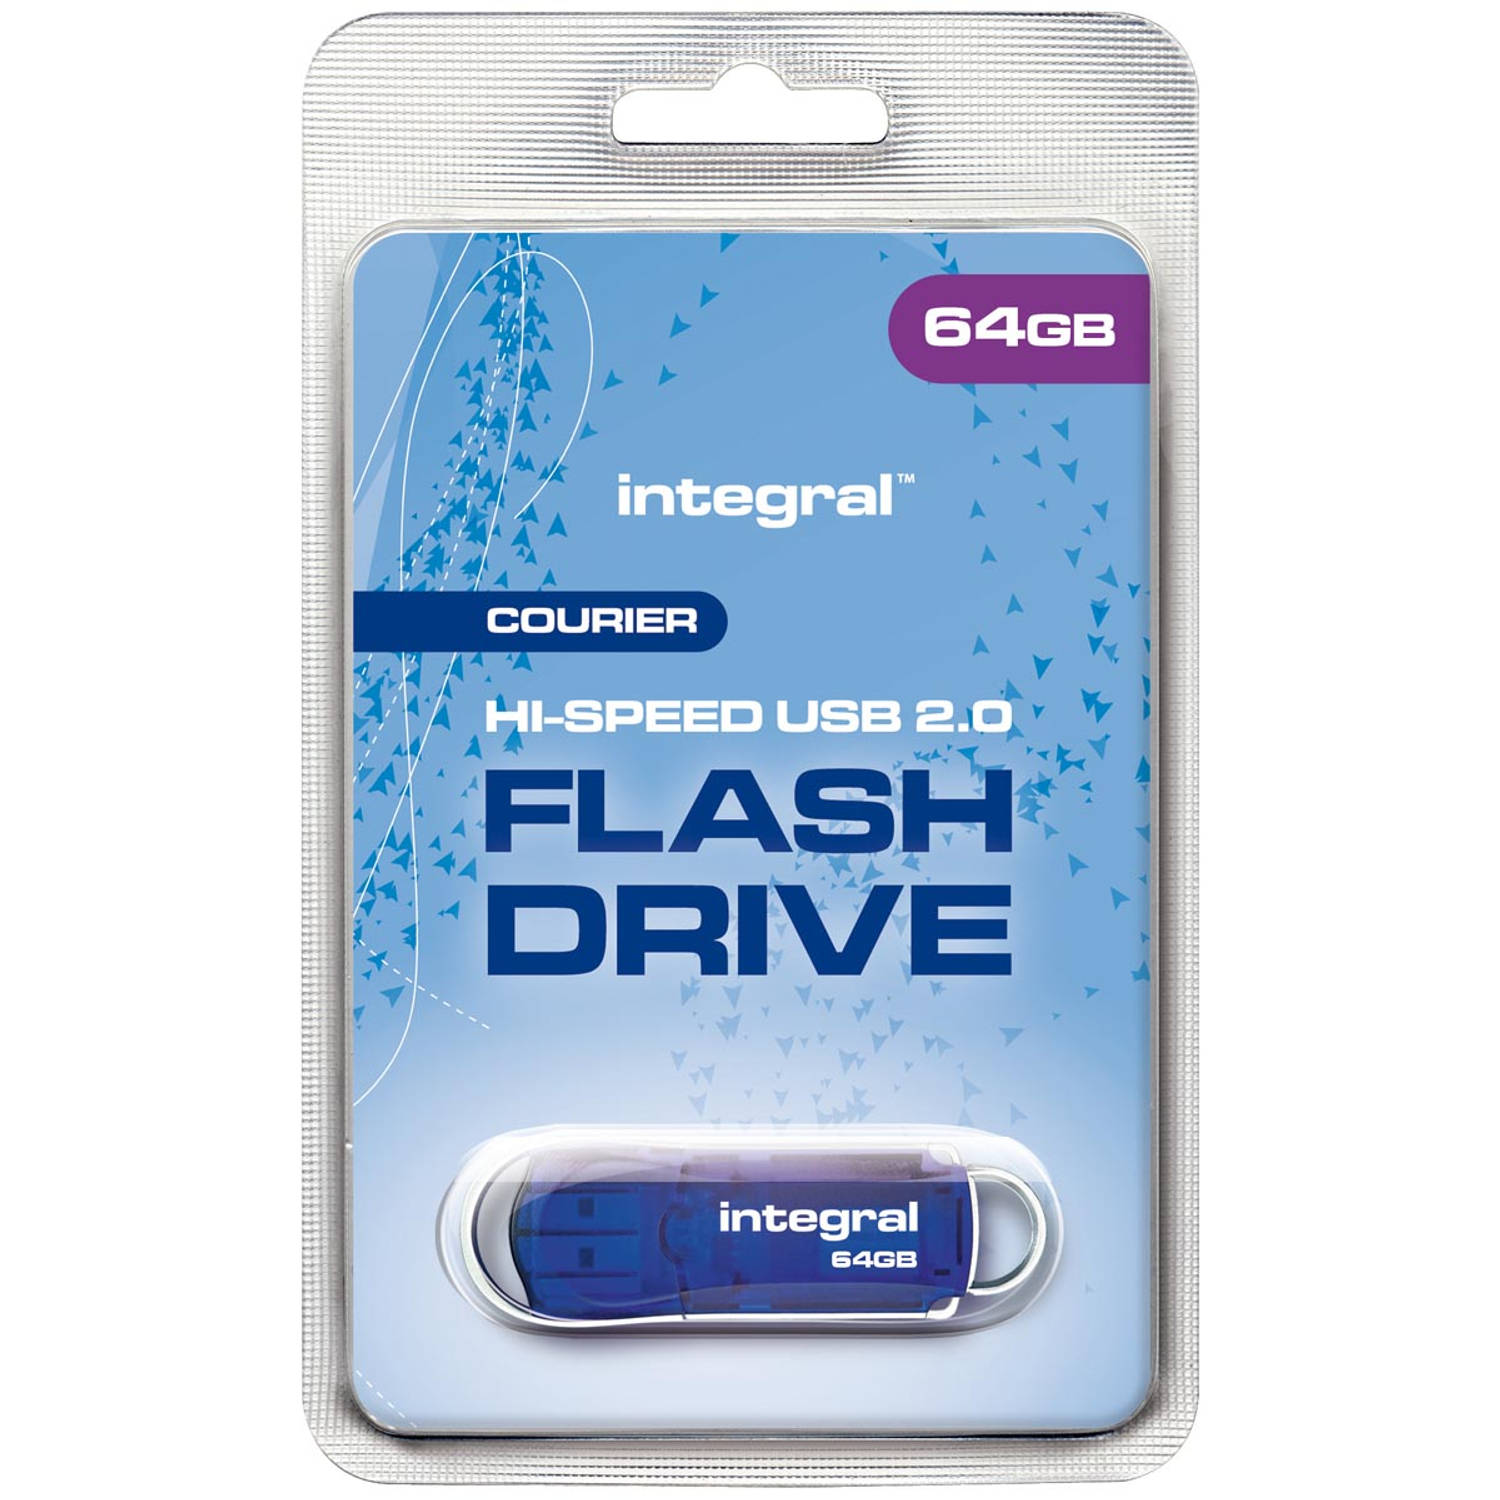 Integral 64GB Courier Pendrive